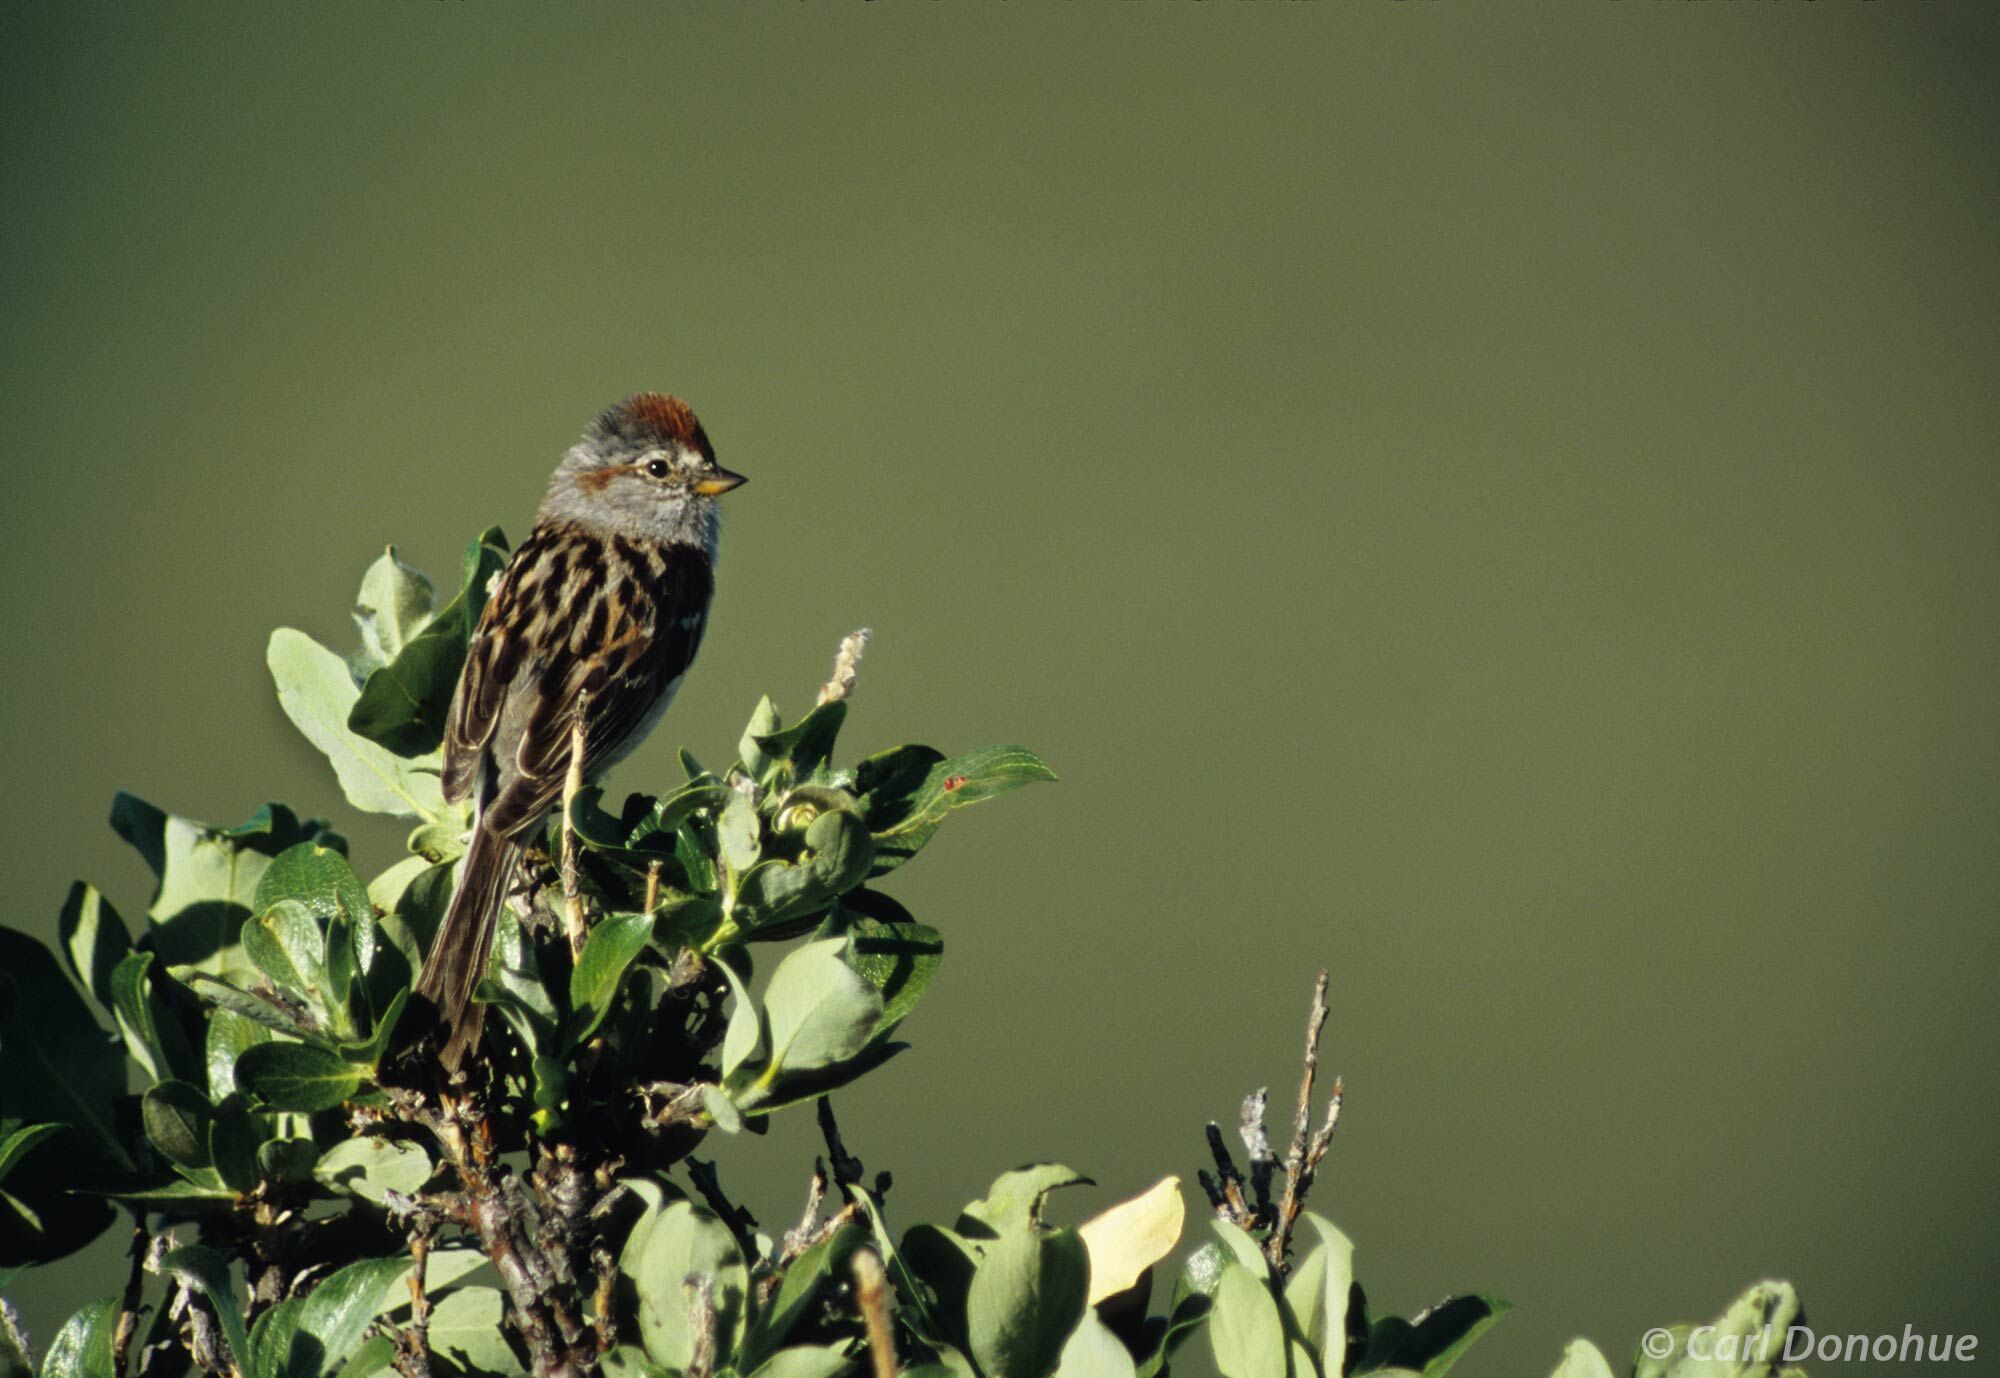 An American Tree Sparrow sits perched on a leafy branch in Wrangell-St. Elias National Park, its small form silhouetted against...